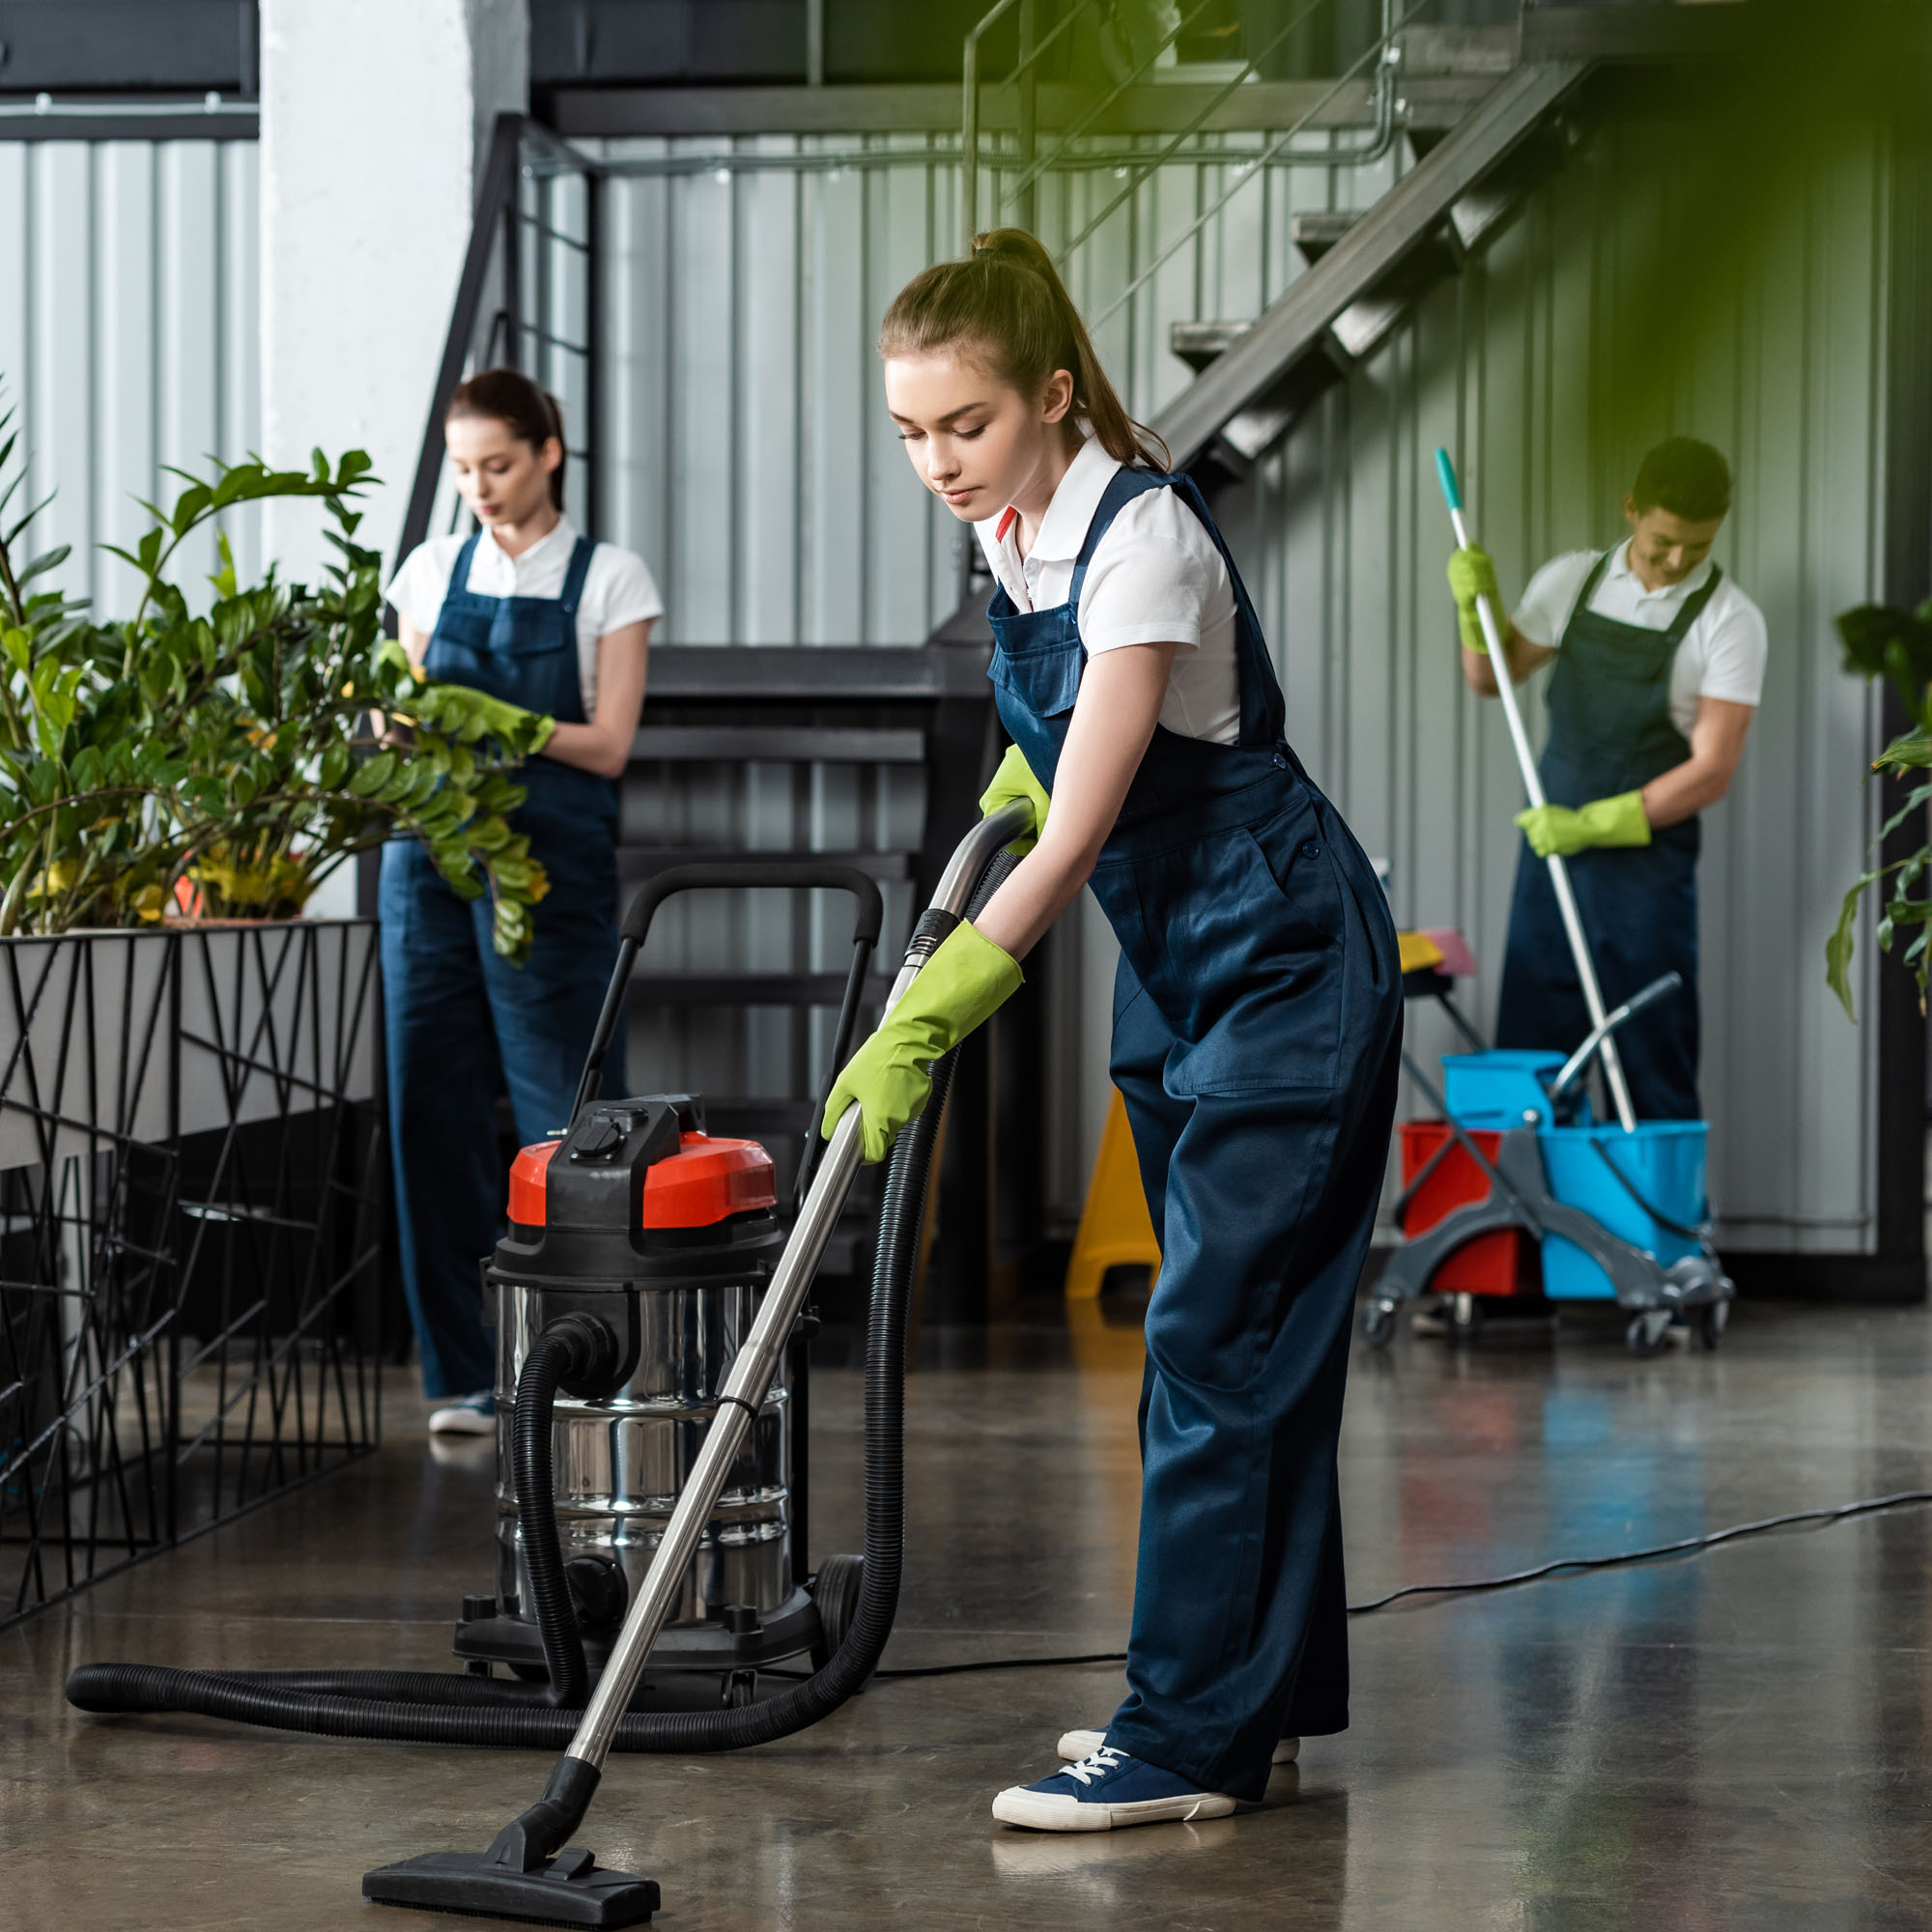 A team of cleaners cleaning an office building